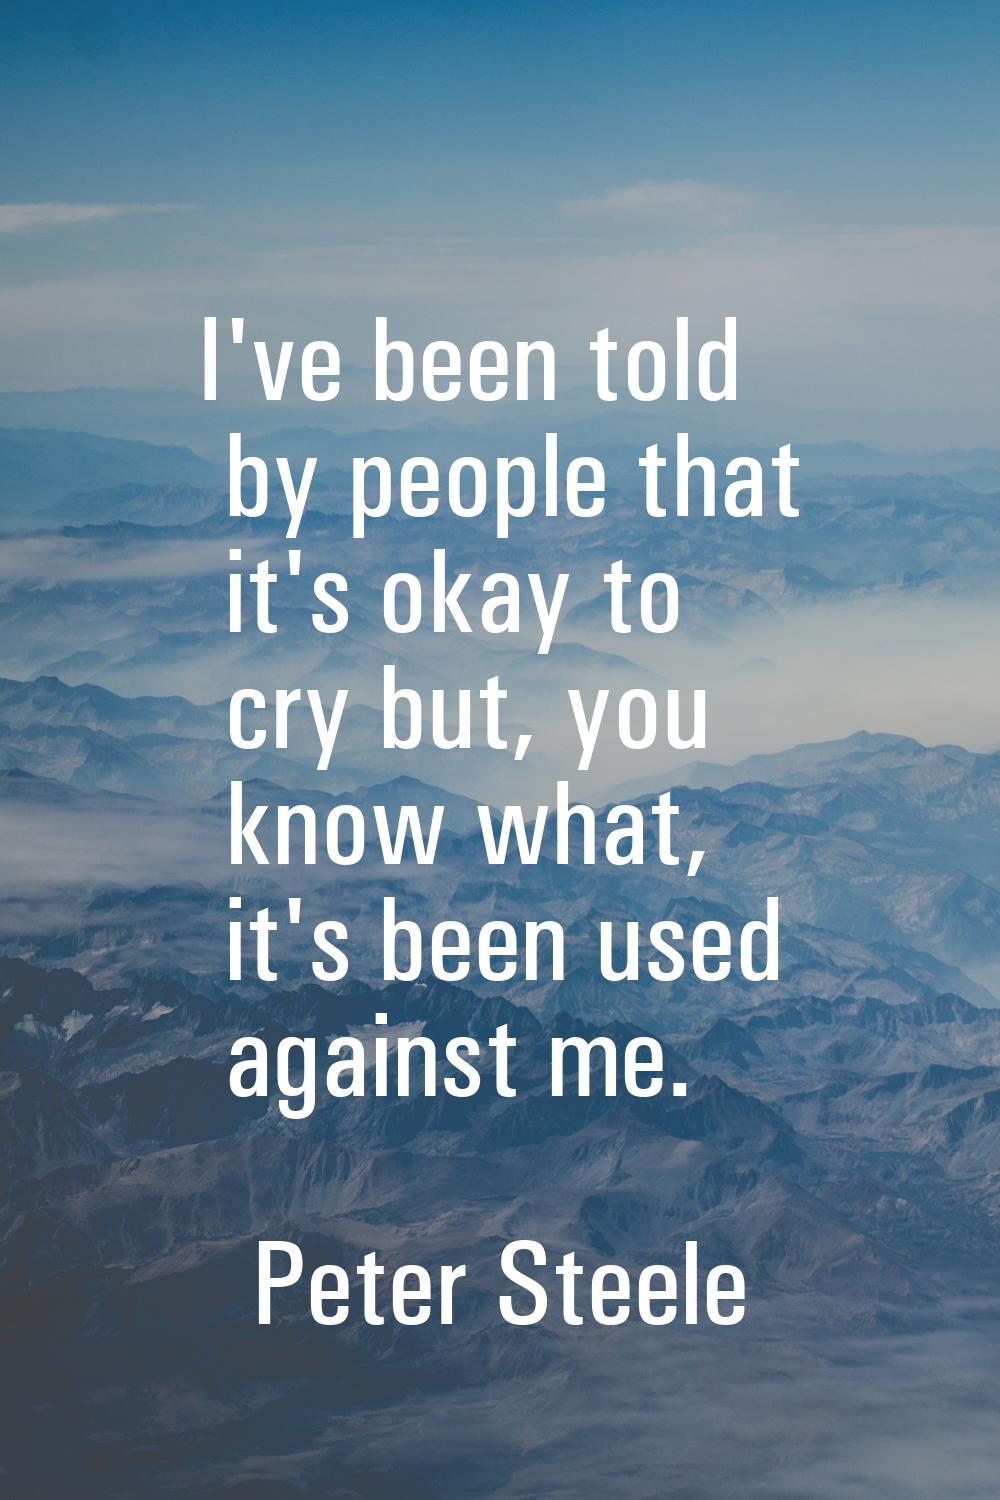 I've been told by people that it's okay to cry but, you know what, it's been used against me.